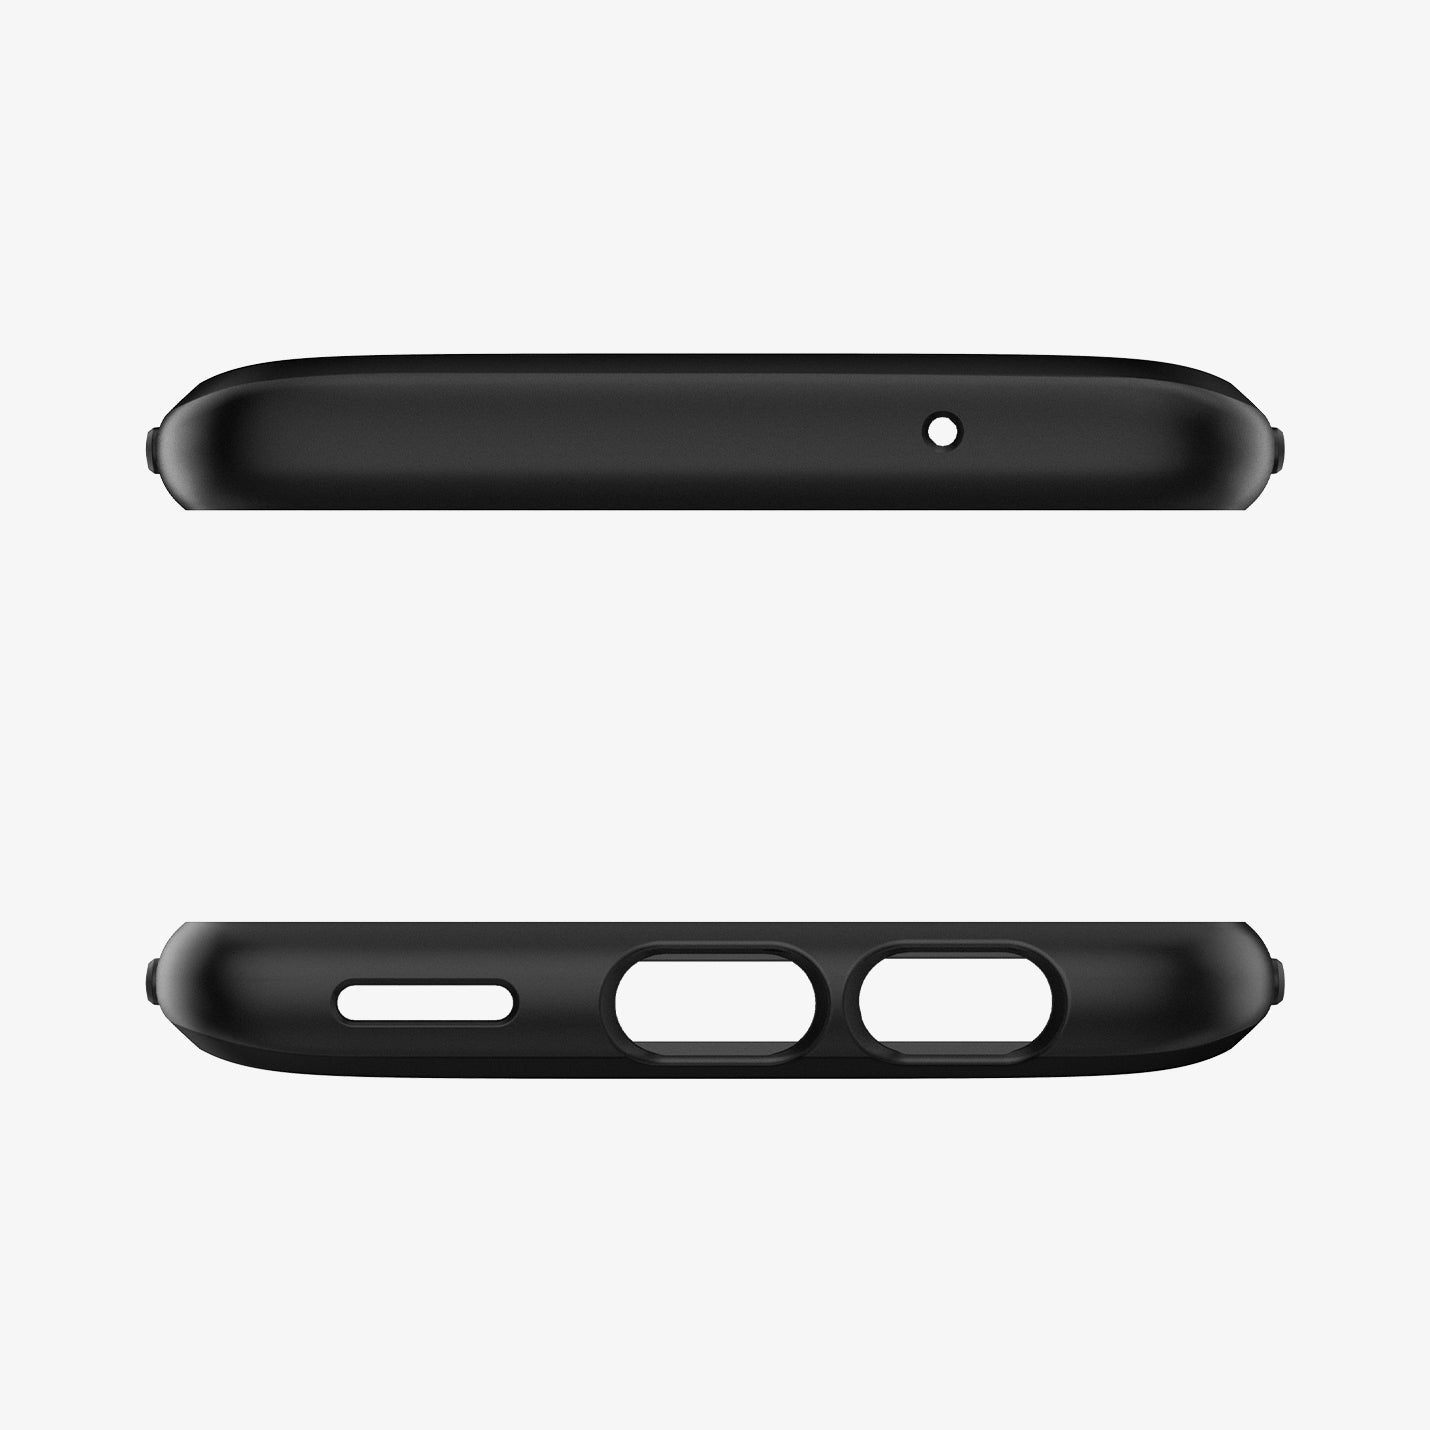 K06CS23358 - OnePlus 6 Rugged Armor Case in Black showing the top and bottom